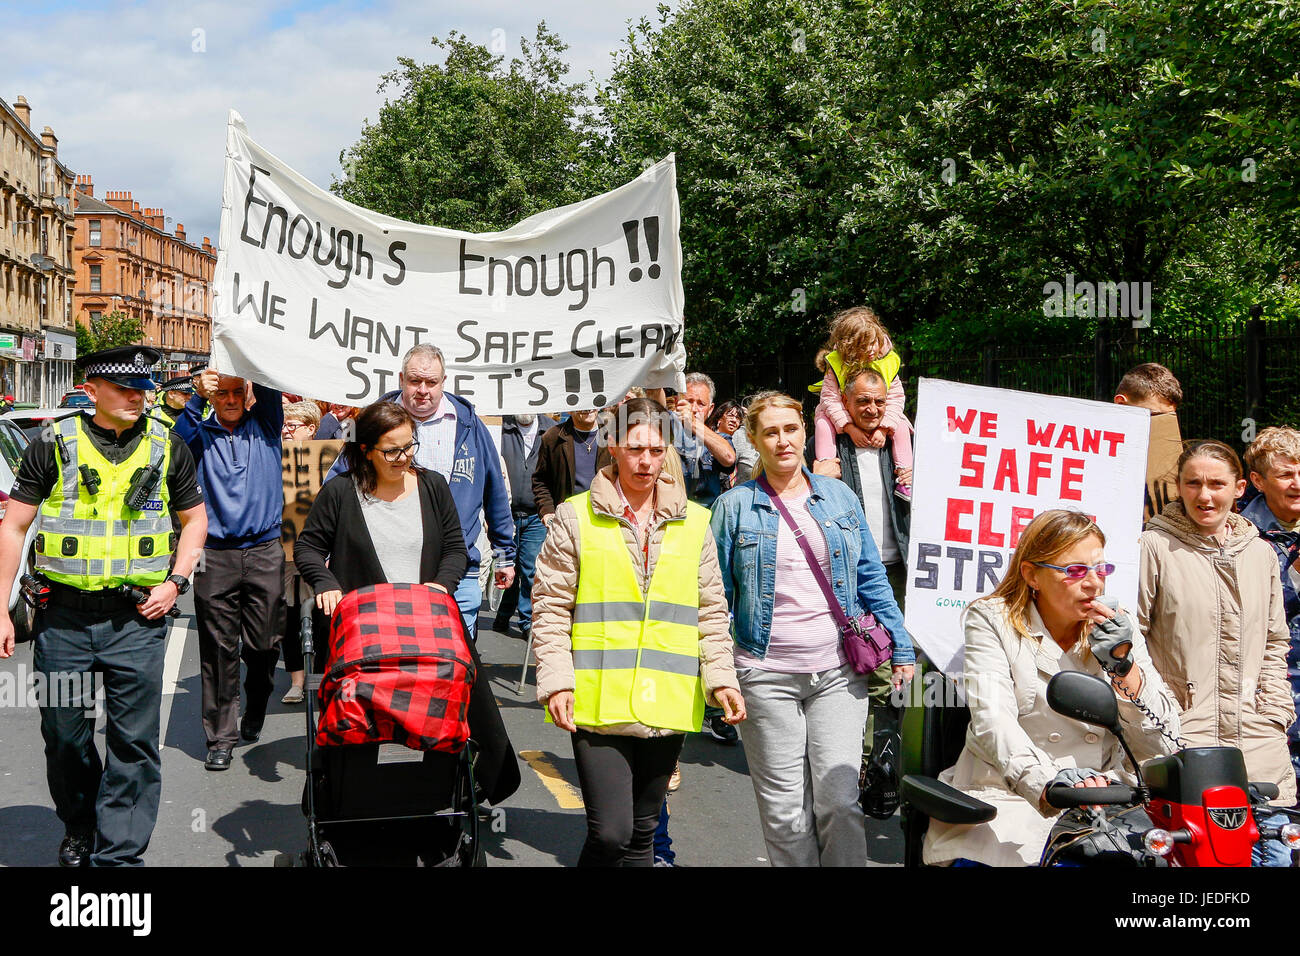 Glasgow, UK. 24th June, 2017. LIZ CROSBIE and FRANCES STOJILKOVIC from Govanhill Community Campaign lead a protest march of several hundred local residents through Govanhill, Glasgow to NICOLA STURGEON's (MSP and Scotland's First Minister) constituency office to hand in a petition demanding action be taken to make the streets safer and cleaner. This was the latest action in a long standing campaign trying to involve and get action from NICOLA STURGEON, who was unavailable and the petition was received by MHAIRI HUNTER, an SNP local counsellor on her behalf. Credit: Findlay/Alamy Live News Stock Photo